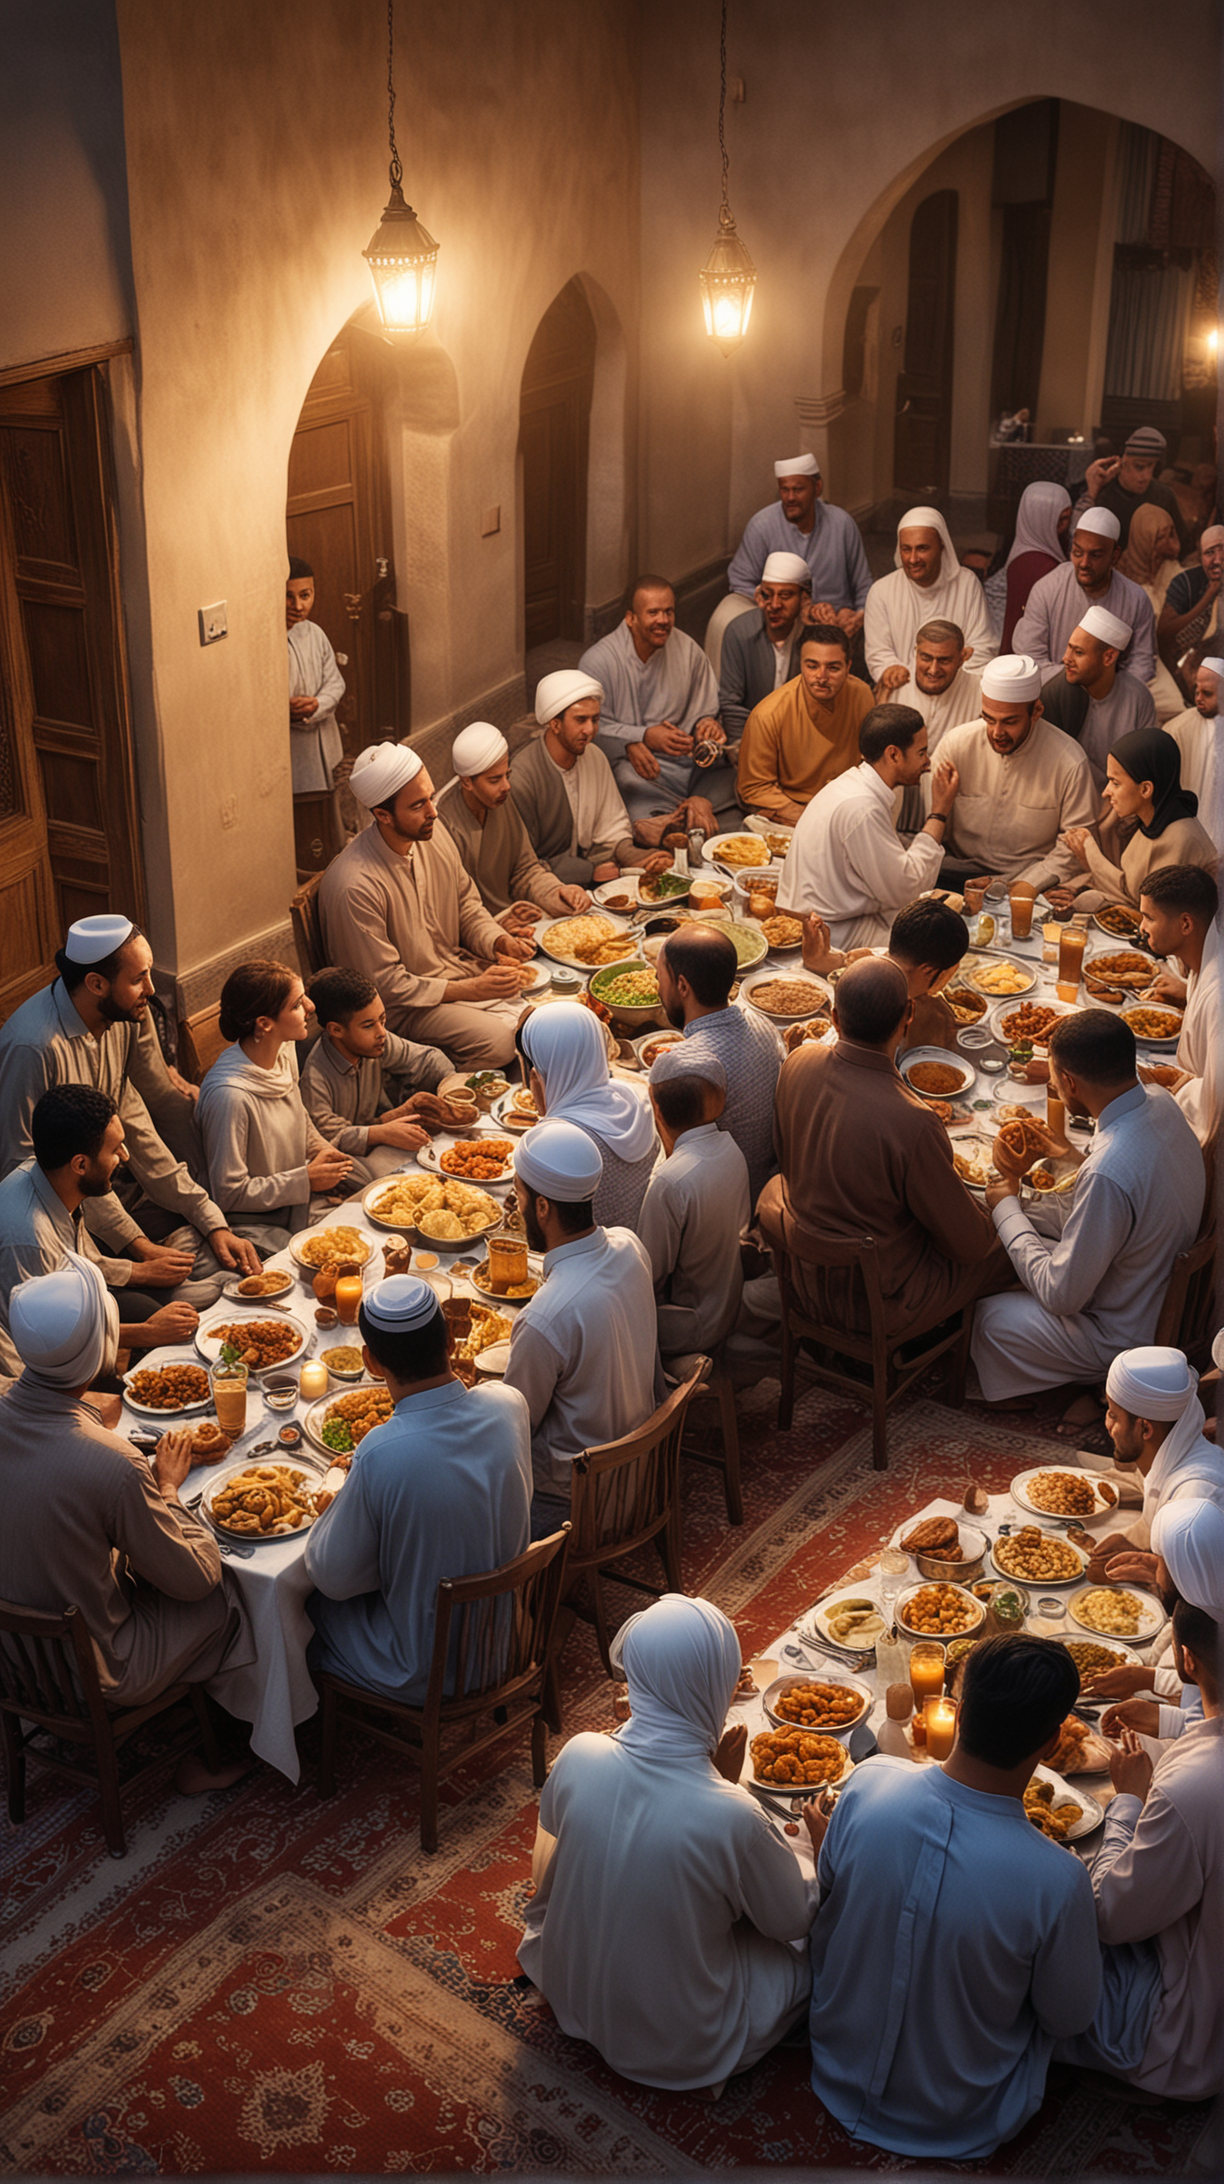 A heartwarming scene of families and friends gathering for Iftar, the breaking of the fast during Ramadan, as they sit together to share a meal and offer prayers of gratitude, fostering a sense of community and solidarity. Hyper realistic